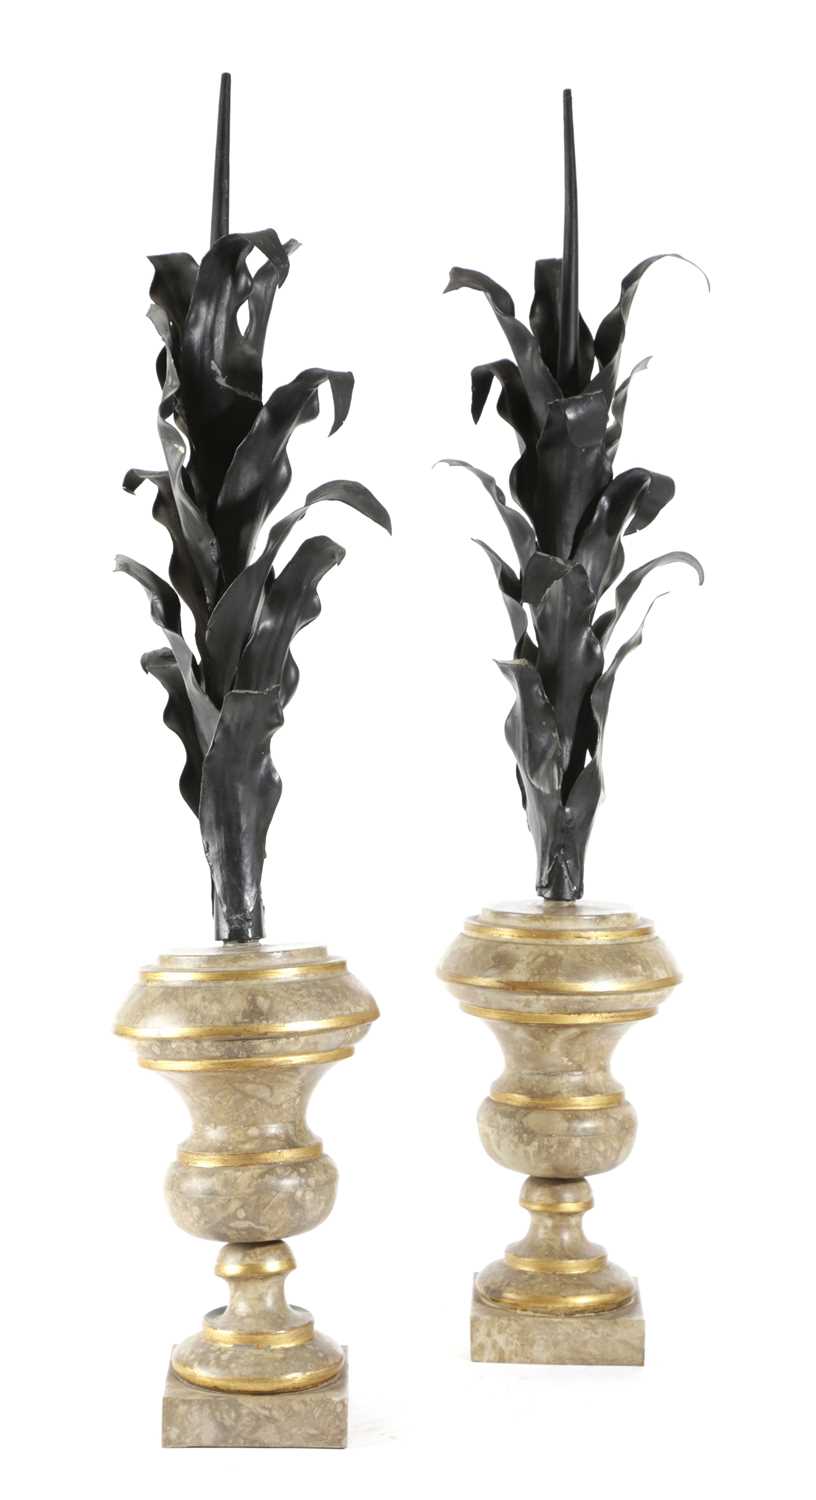 A RARE PAIR OF TÔLE PEINTE URNS ATTRIBUTED TO COLEFAX & FOWLER, C.1960 each in the form of a campana